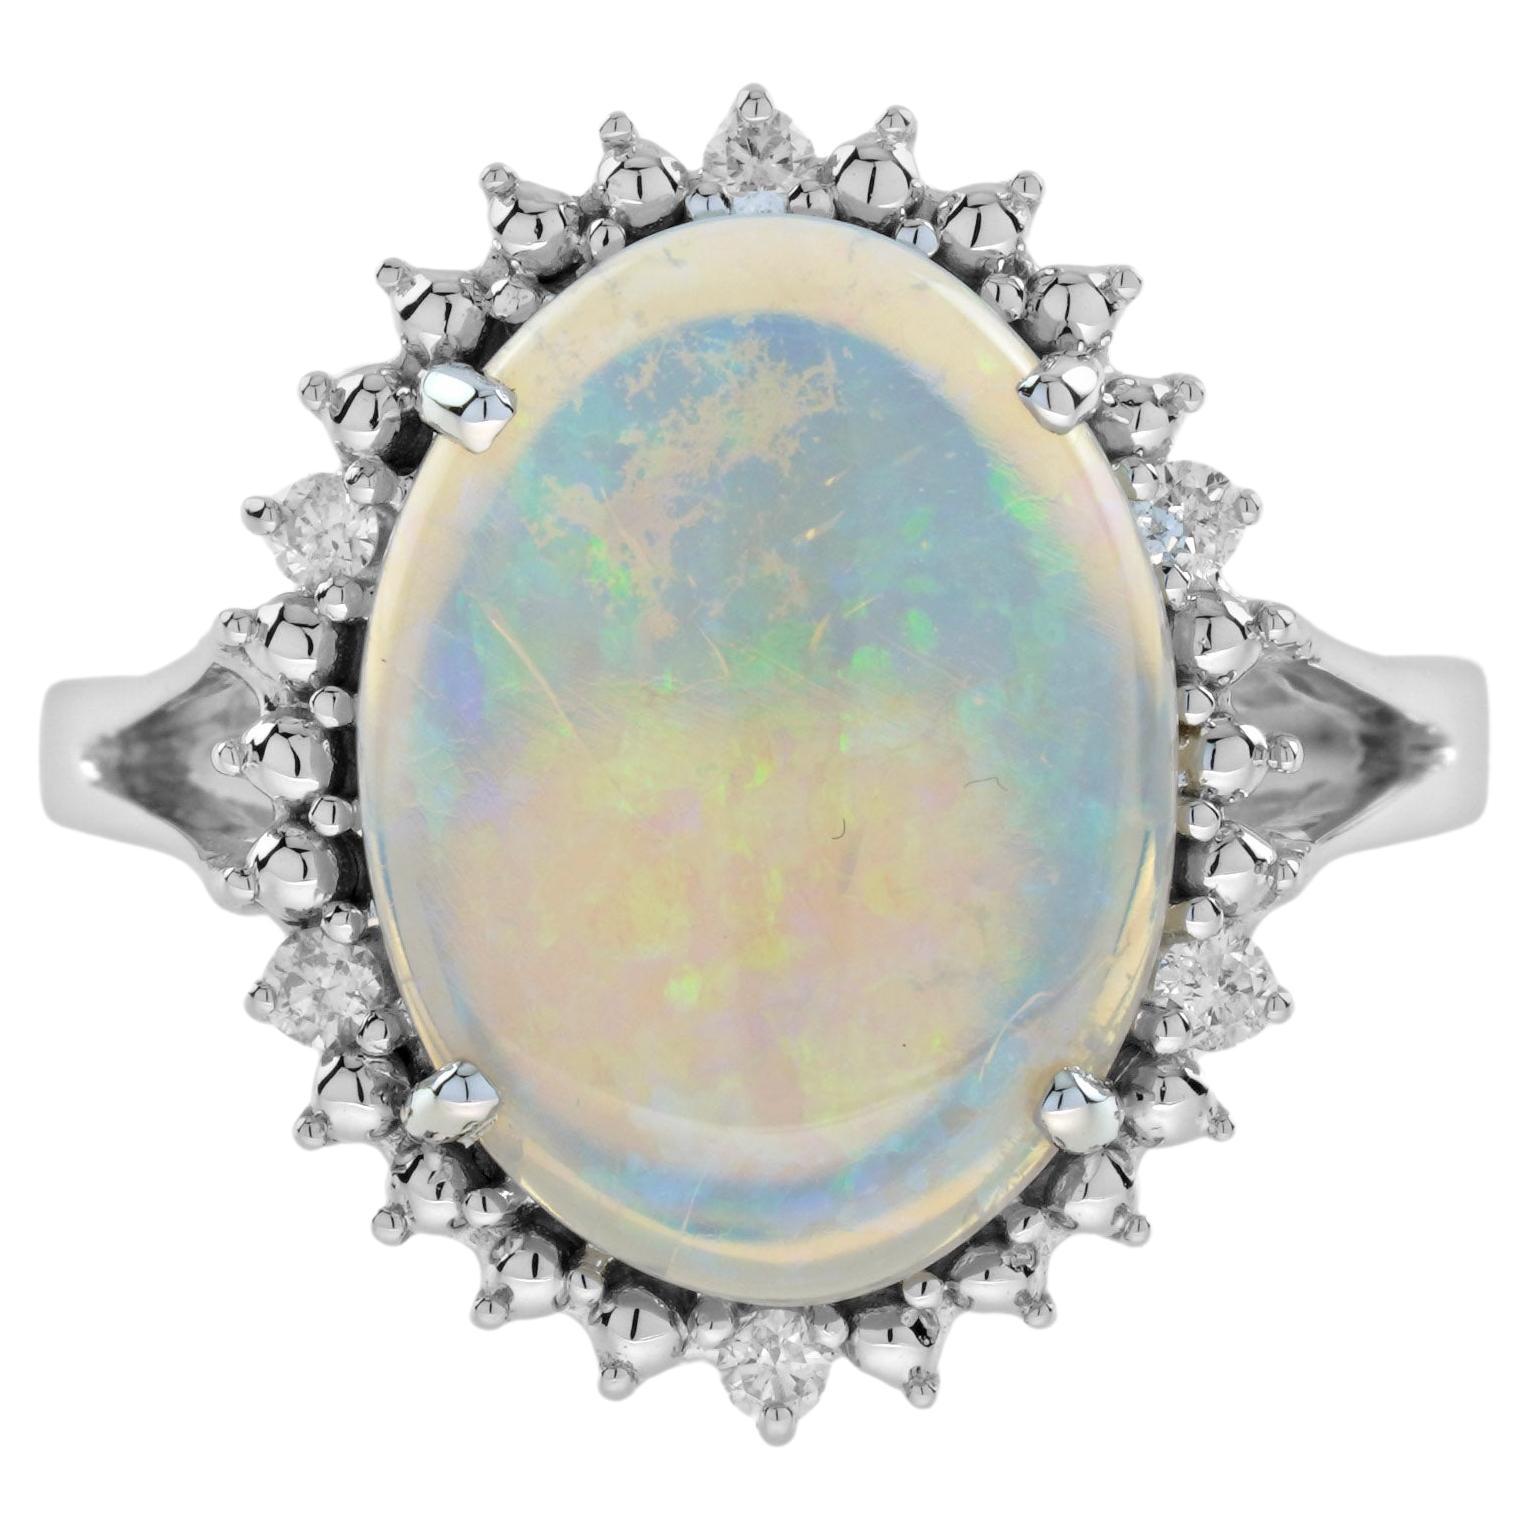 2.53 Ct. Opal and Diamond Vintage Style Cocktail Ring in 9K White Gold